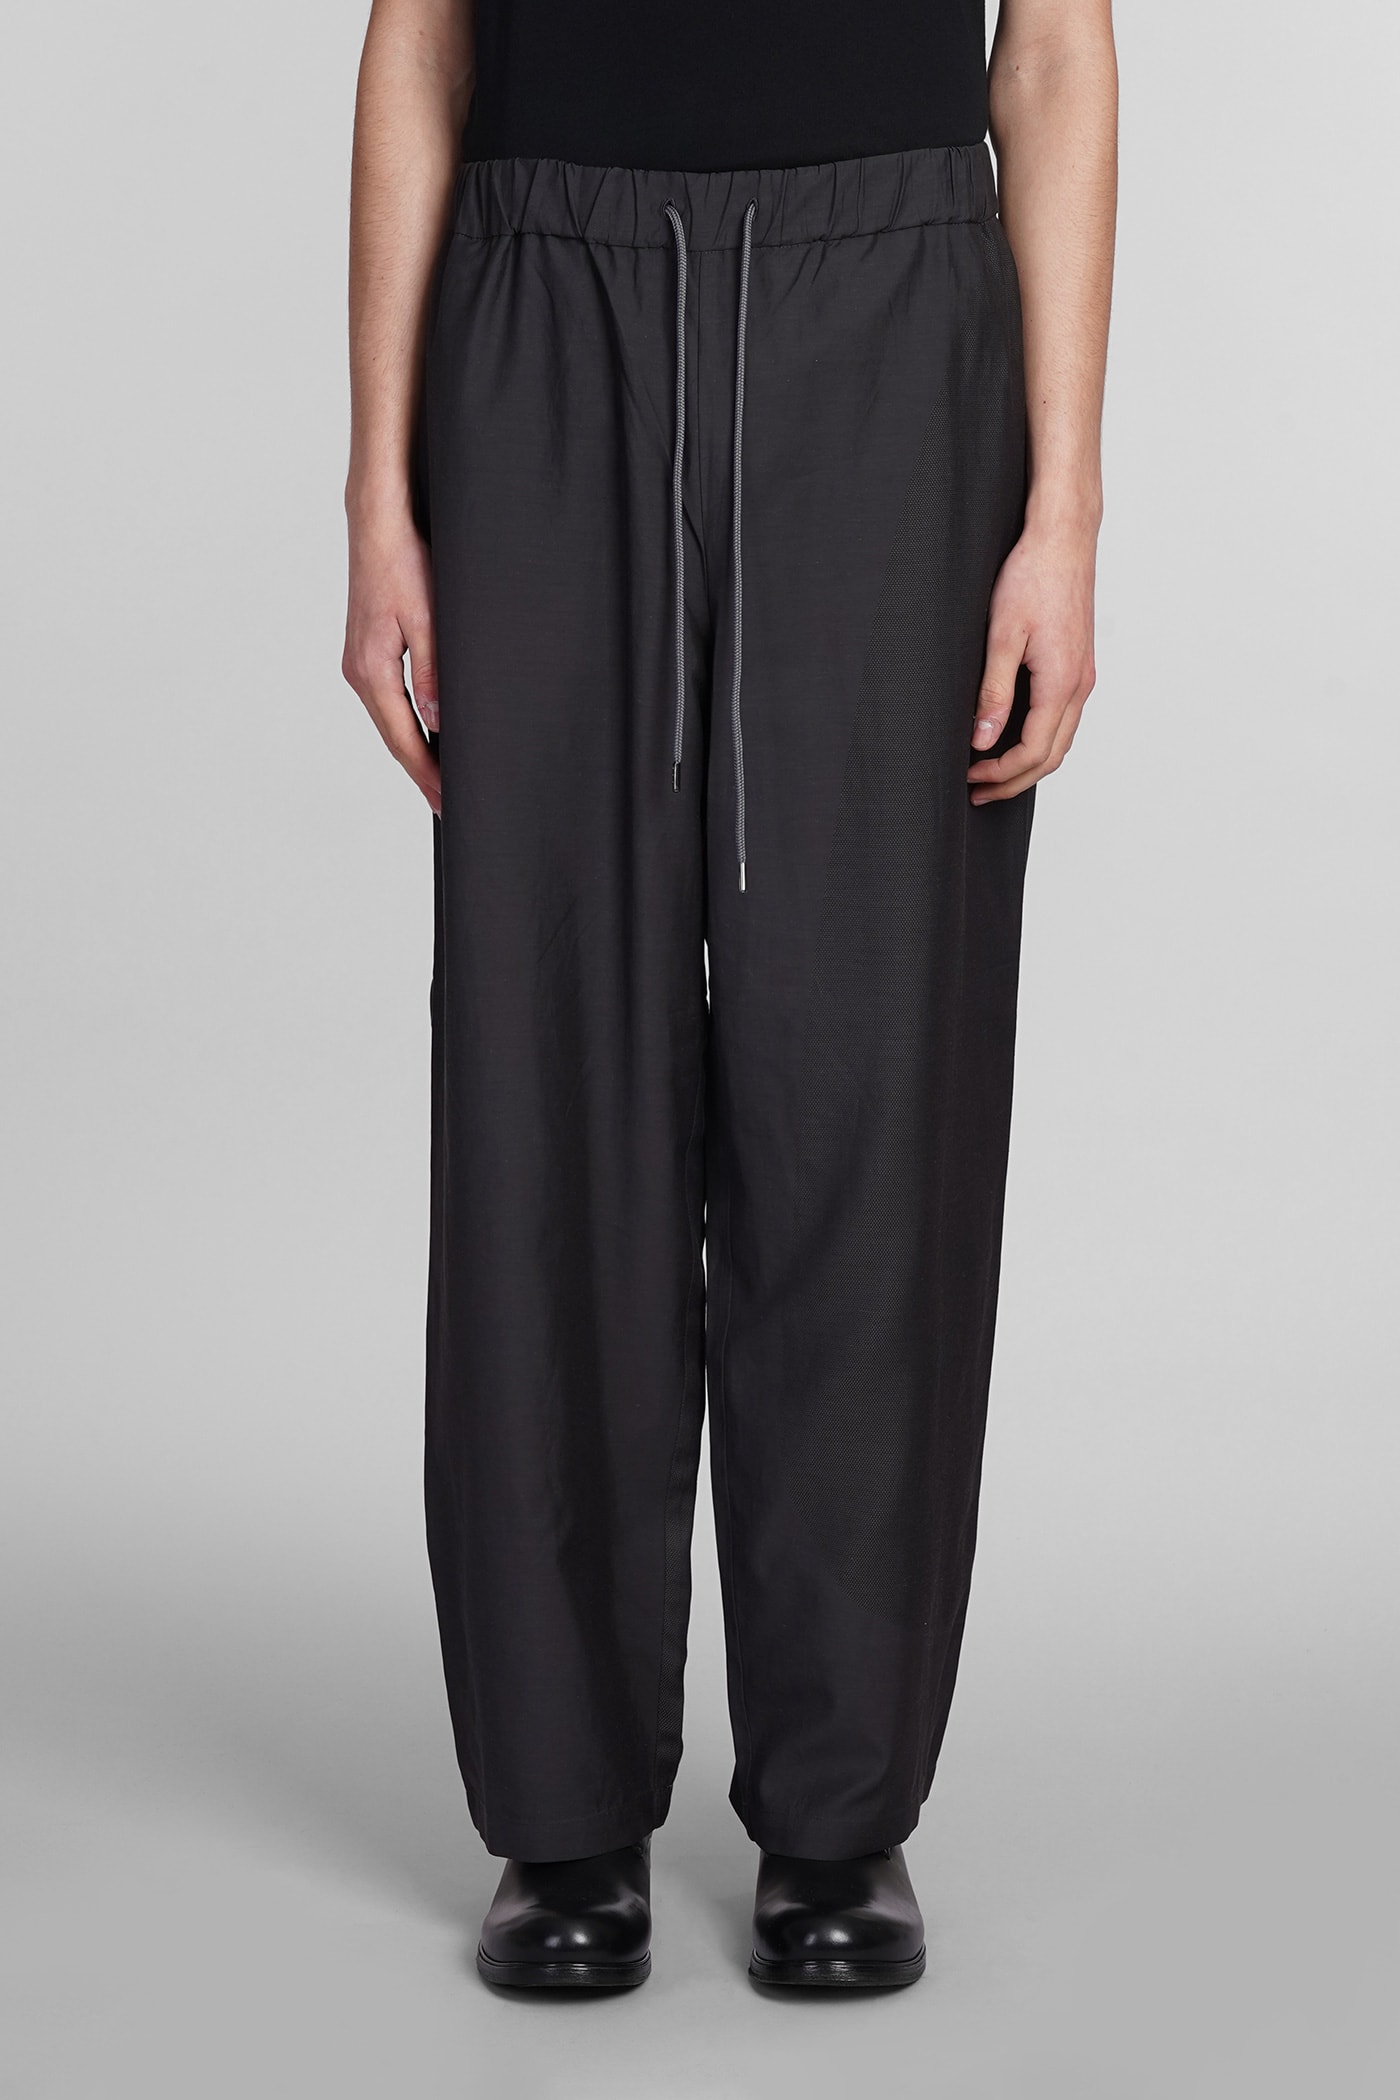 Attachment Pants In Grey Rayon